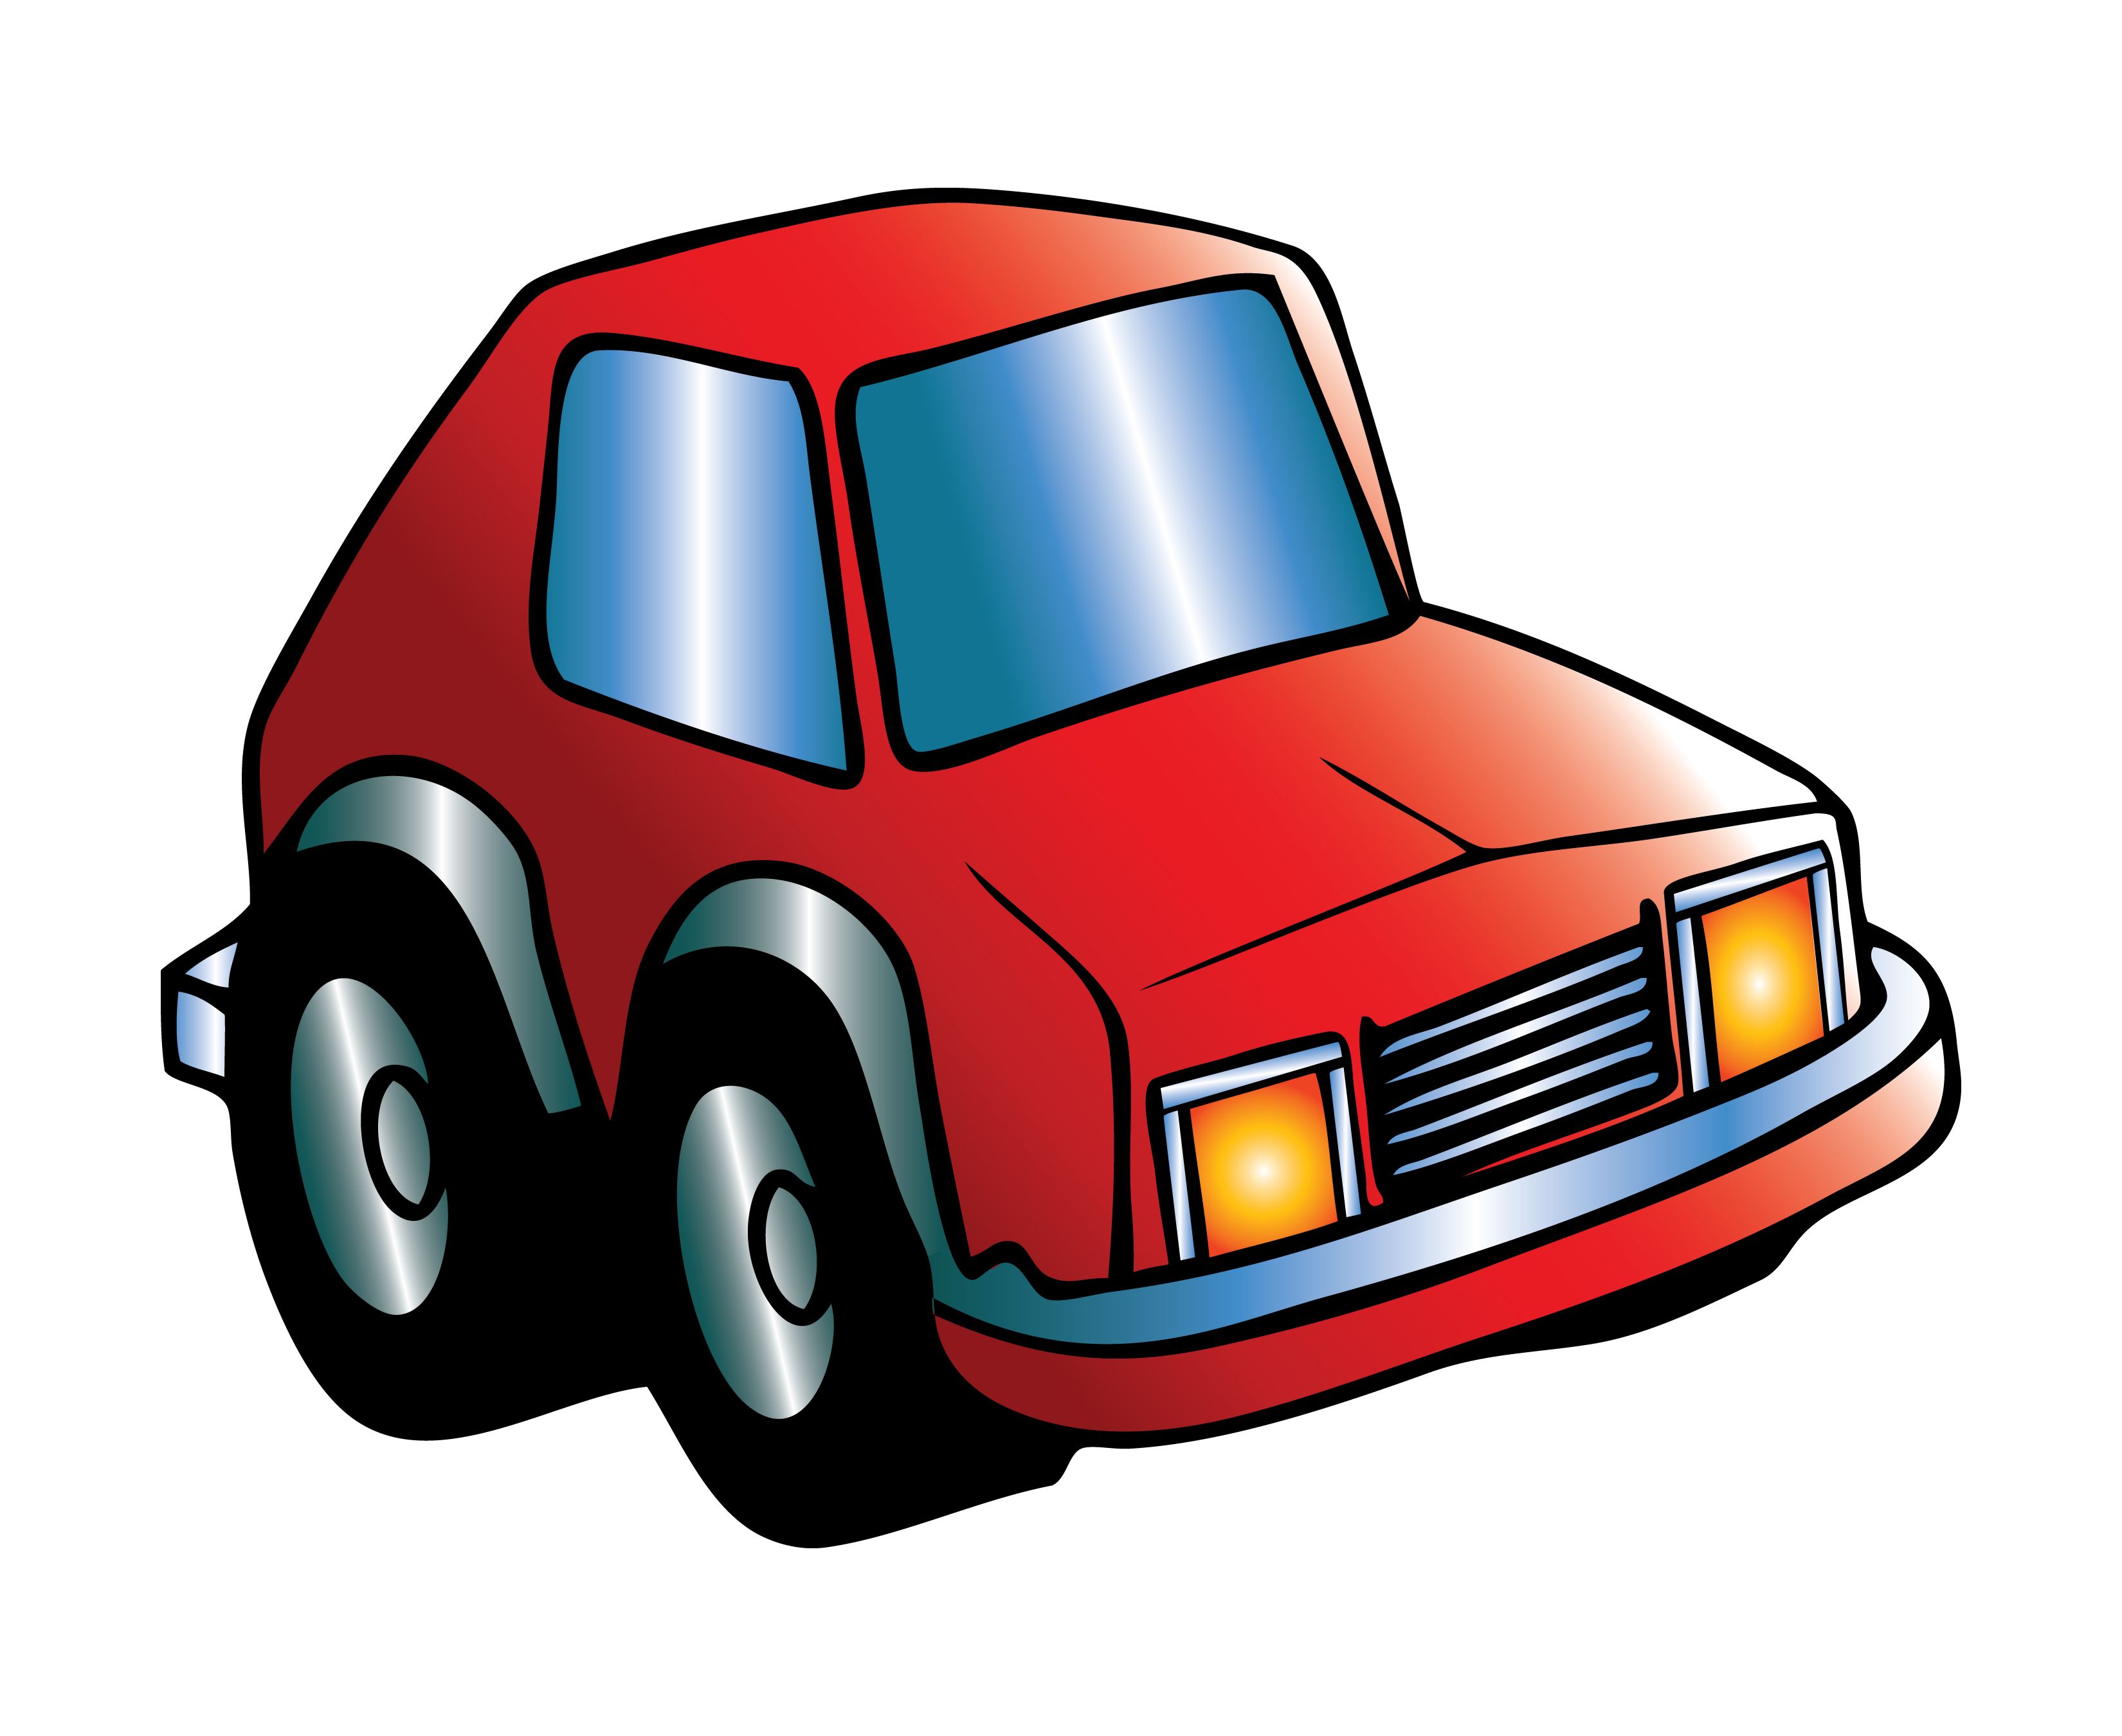 Cartoon Cars Coloring Pages For Kids >> Disney